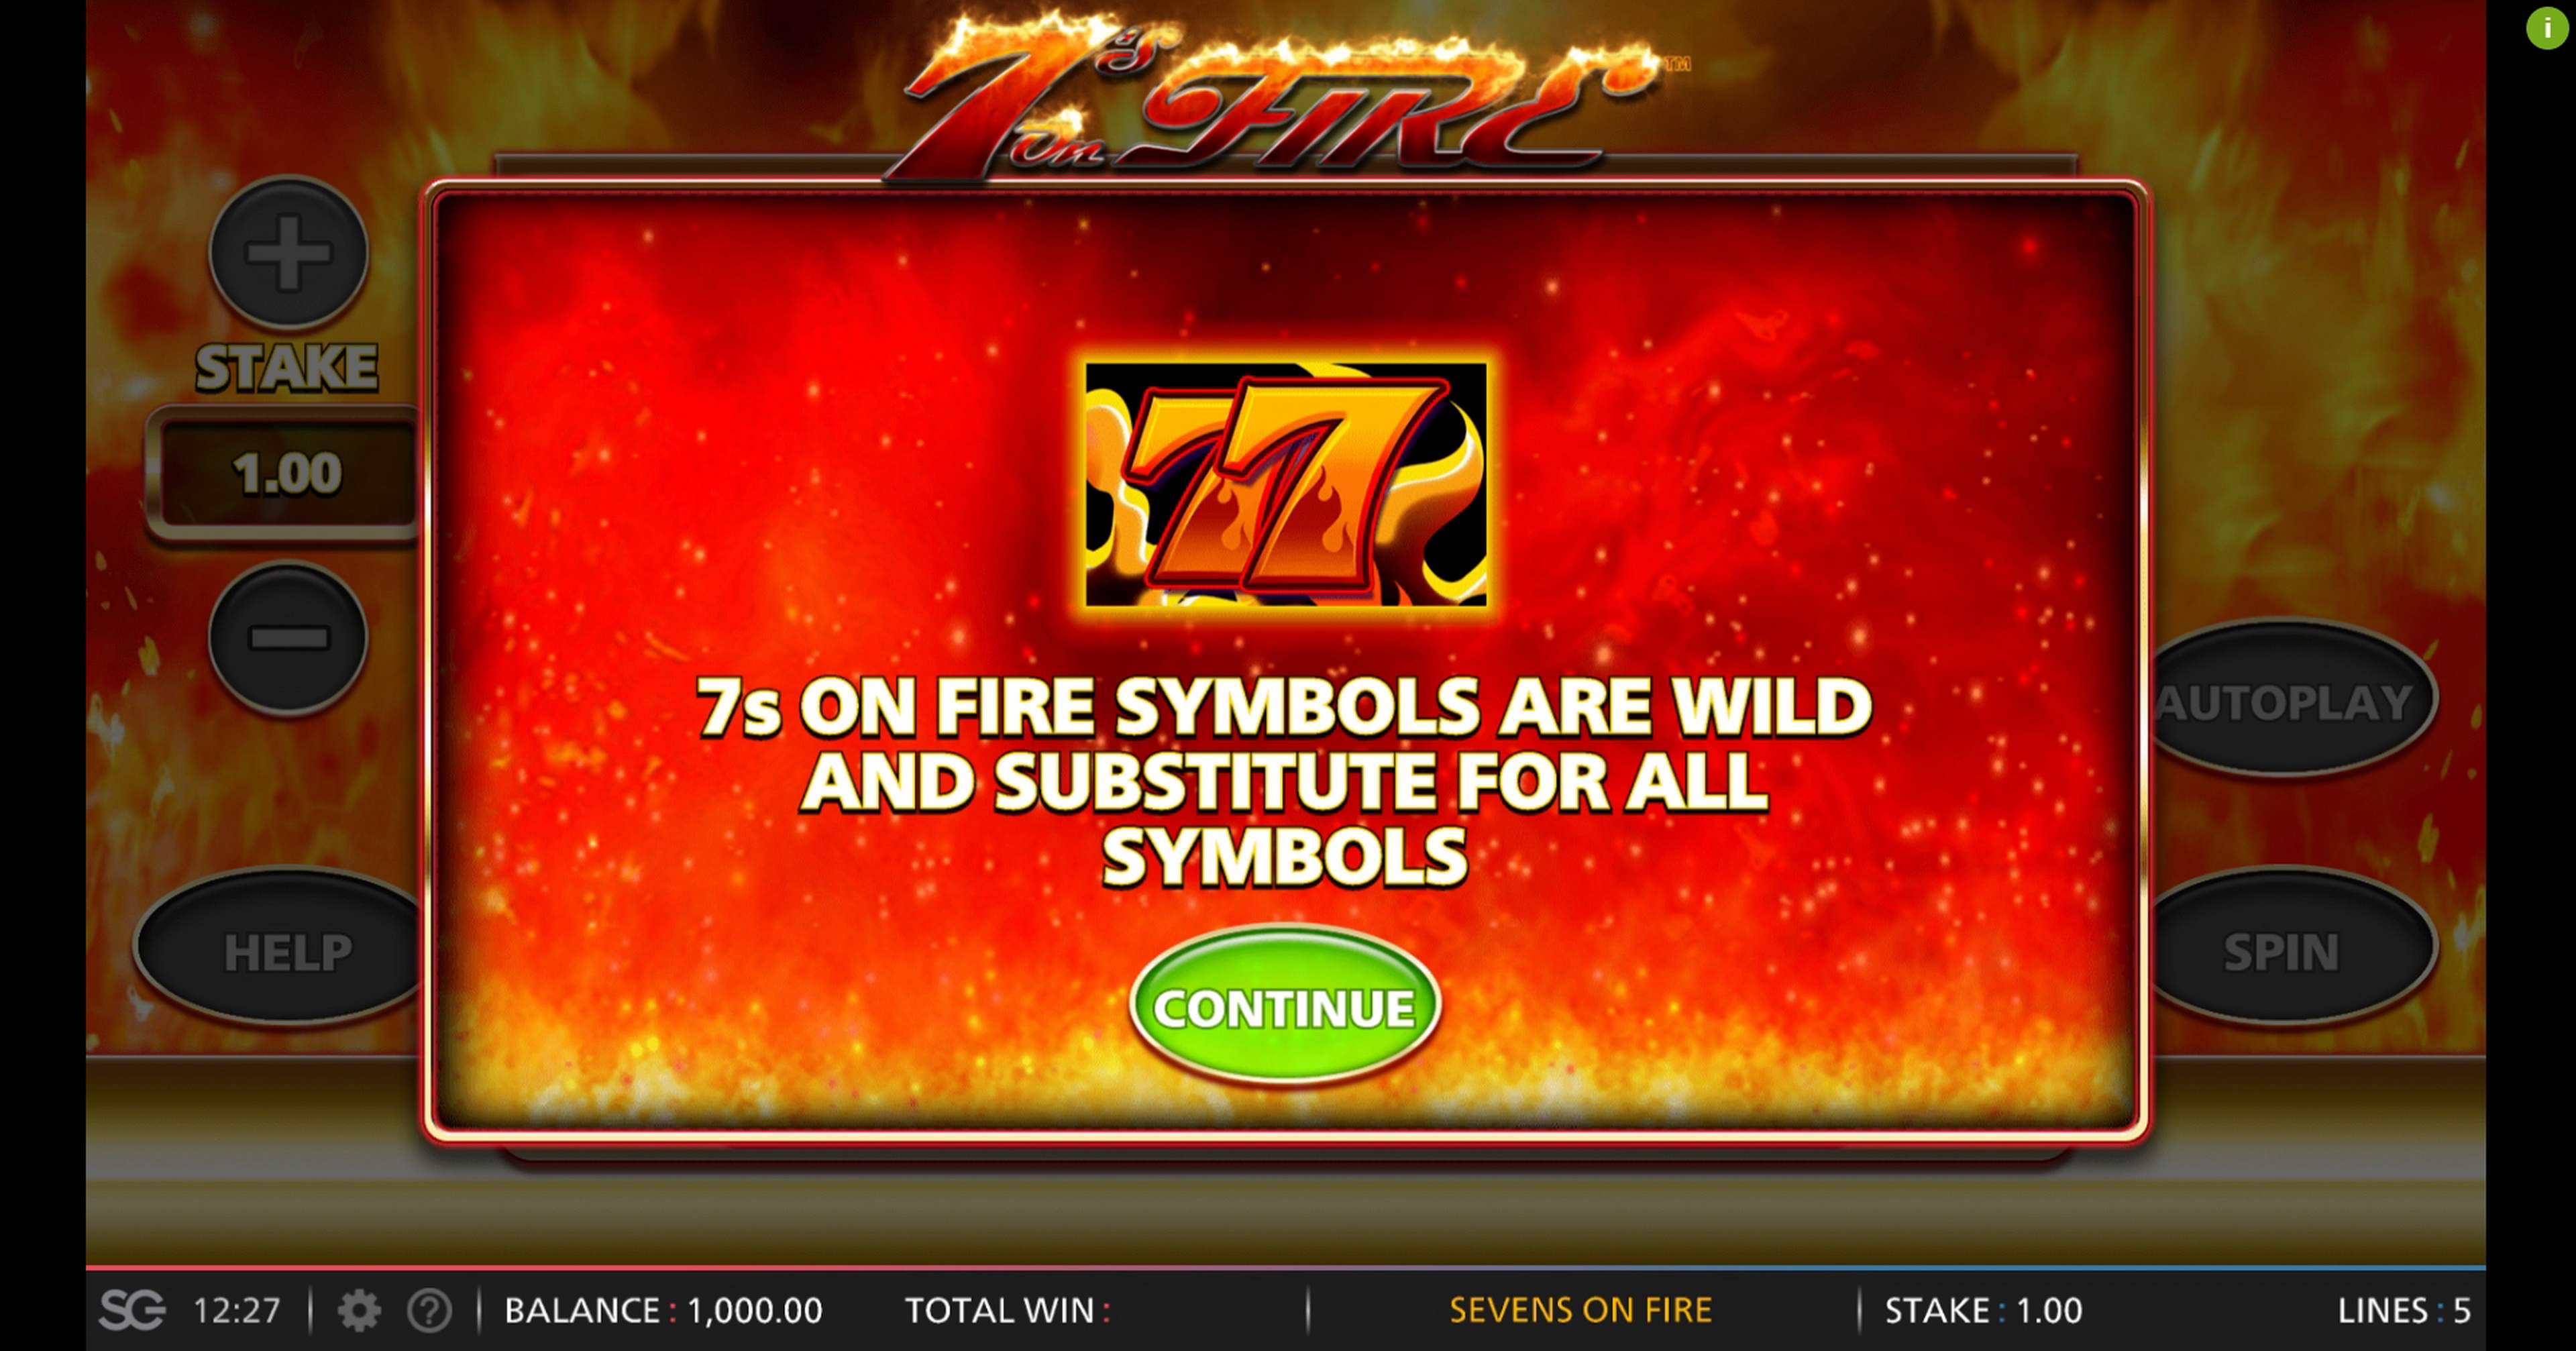 Play 7s On Fire Free Casino Slot Game by Barcrest Games